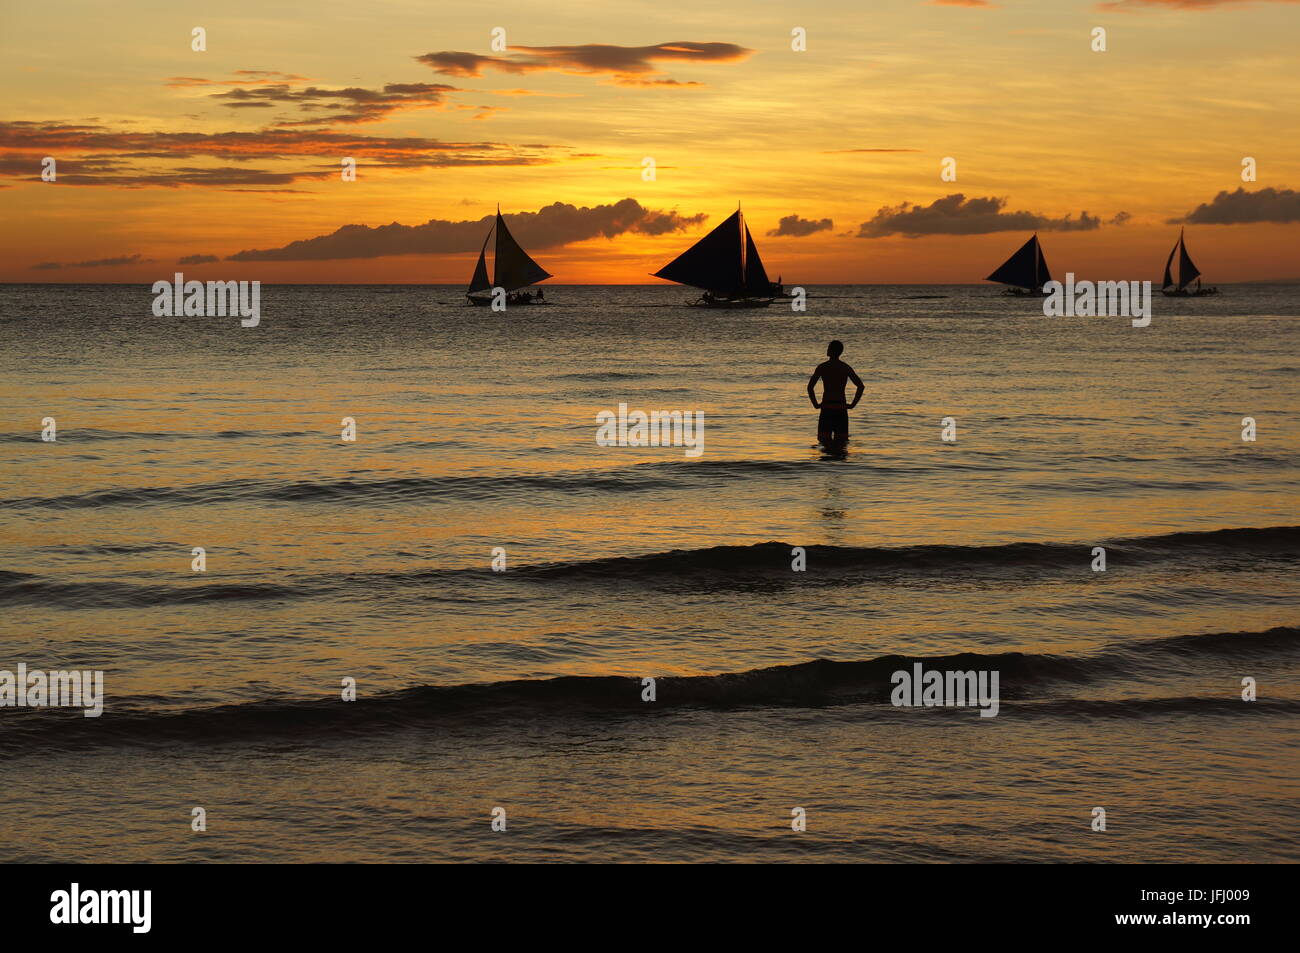 Beach sunset background stunning Philippines island Boracay.  A man stands hands on hips in the sea watching the sailing boats pass by the golden sky. Stock Photo